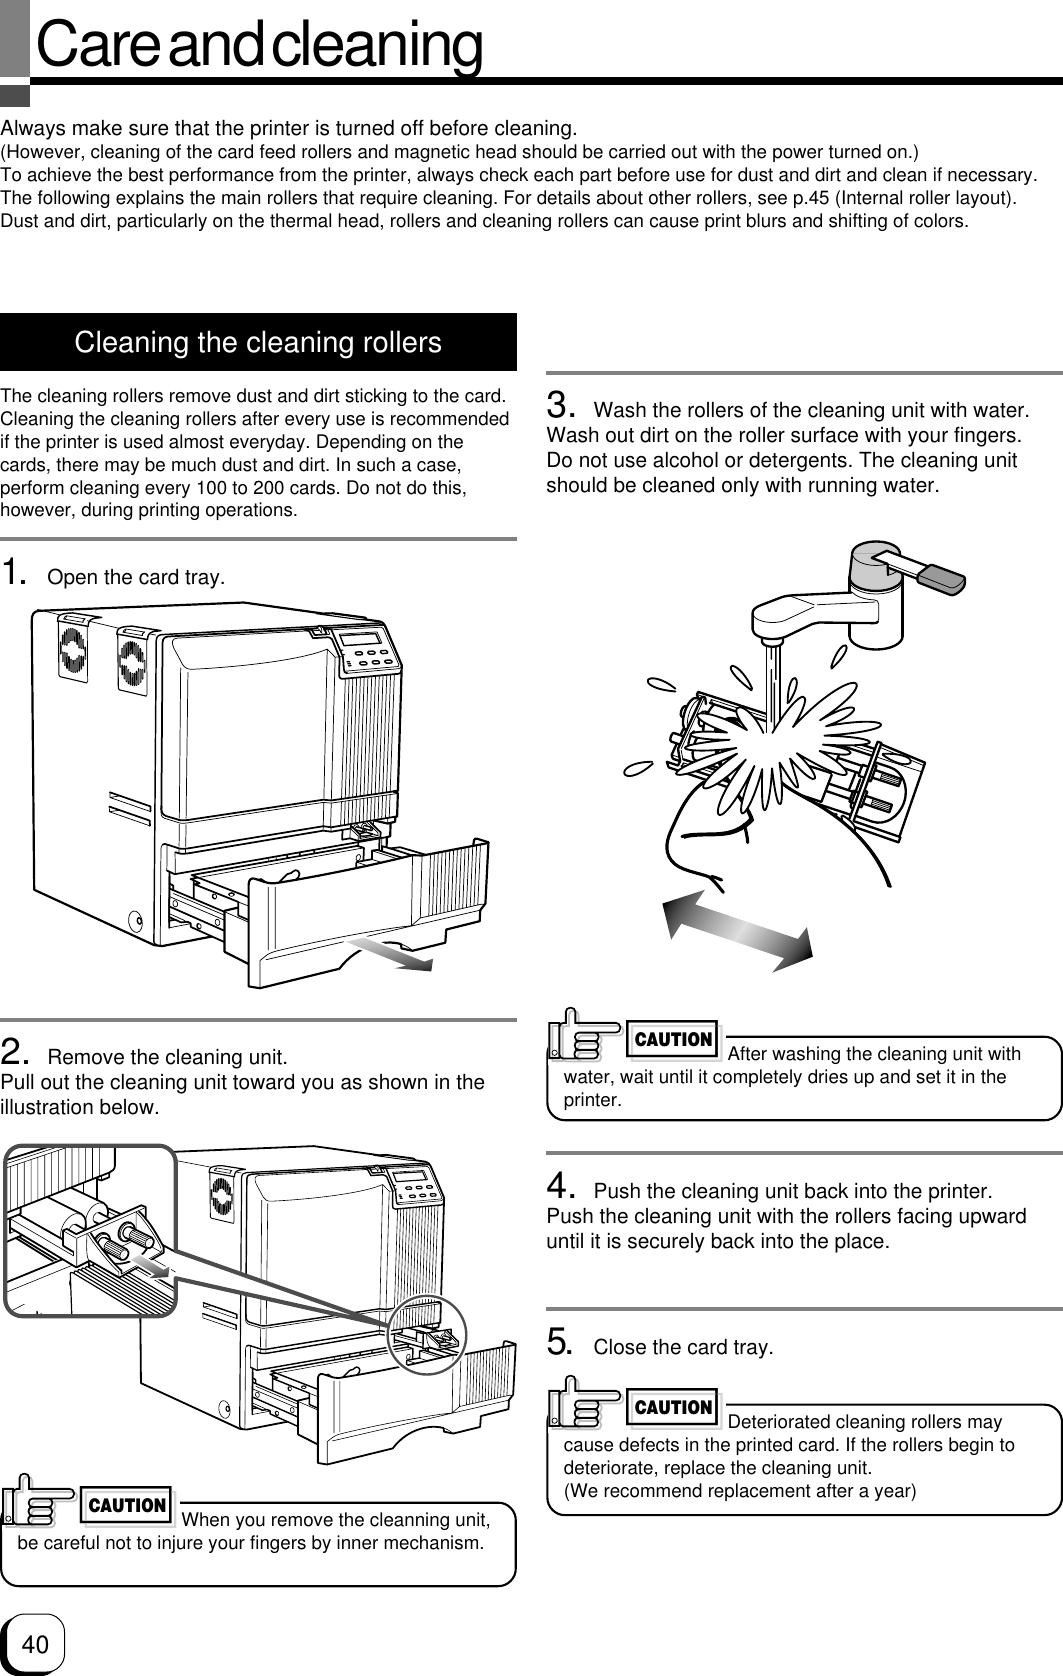 40Care and cleaningAlways make sure that the printer is turned off before cleaning.(However, cleaning of the card feed rollers and magnetic head should be carried out with the power turned on.)To achieve the best performance from the printer, always check each part before use for dust and dirt and clean if necessary.The following explains the main rollers that require cleaning. For details about other rollers, see p.45 (Internal roller layout).Dust and dirt, particularly on the thermal head, rollers and cleaning rollers can cause print blurs and shifting of colors.Cleaning the cleaning rollersThe cleaning rollers remove dust and dirt sticking to the card.Cleaning the cleaning rollers after every use is recommendedif the printer is used almost everyday. Depending on thecards, there may be much dust and dirt. In such a case,perform cleaning every 100 to 200 cards. Do not do this,however, during printing operations.1. Open the card tray.2. Remove the cleaning unit.Pull out the cleaning unit toward you as shown in theillustration below.3. Wash the rollers of the cleaning unit with water.Wash out dirt on the roller surface with your fingers.Do not use alcohol or detergents. The cleaning unitshould be cleaned only with running water.4. Push the cleaning unit back into the printer.Push the cleaning unit with the rollers facing upwarduntil it is securely back into the place.5. Close the card tray.After washing the cleaning unit withwater, wait until it completely dries up and set it in theprinter.CAUTIONDeteriorated cleaning rollers maycause defects in the printed card. If the rollers begin todeteriorate, replace the cleaning unit.(We recommend replacement after a year)CAUTIONWhen you remove the cleanning unit,be careful not to injure your fingers by inner mechanism.CAUTION